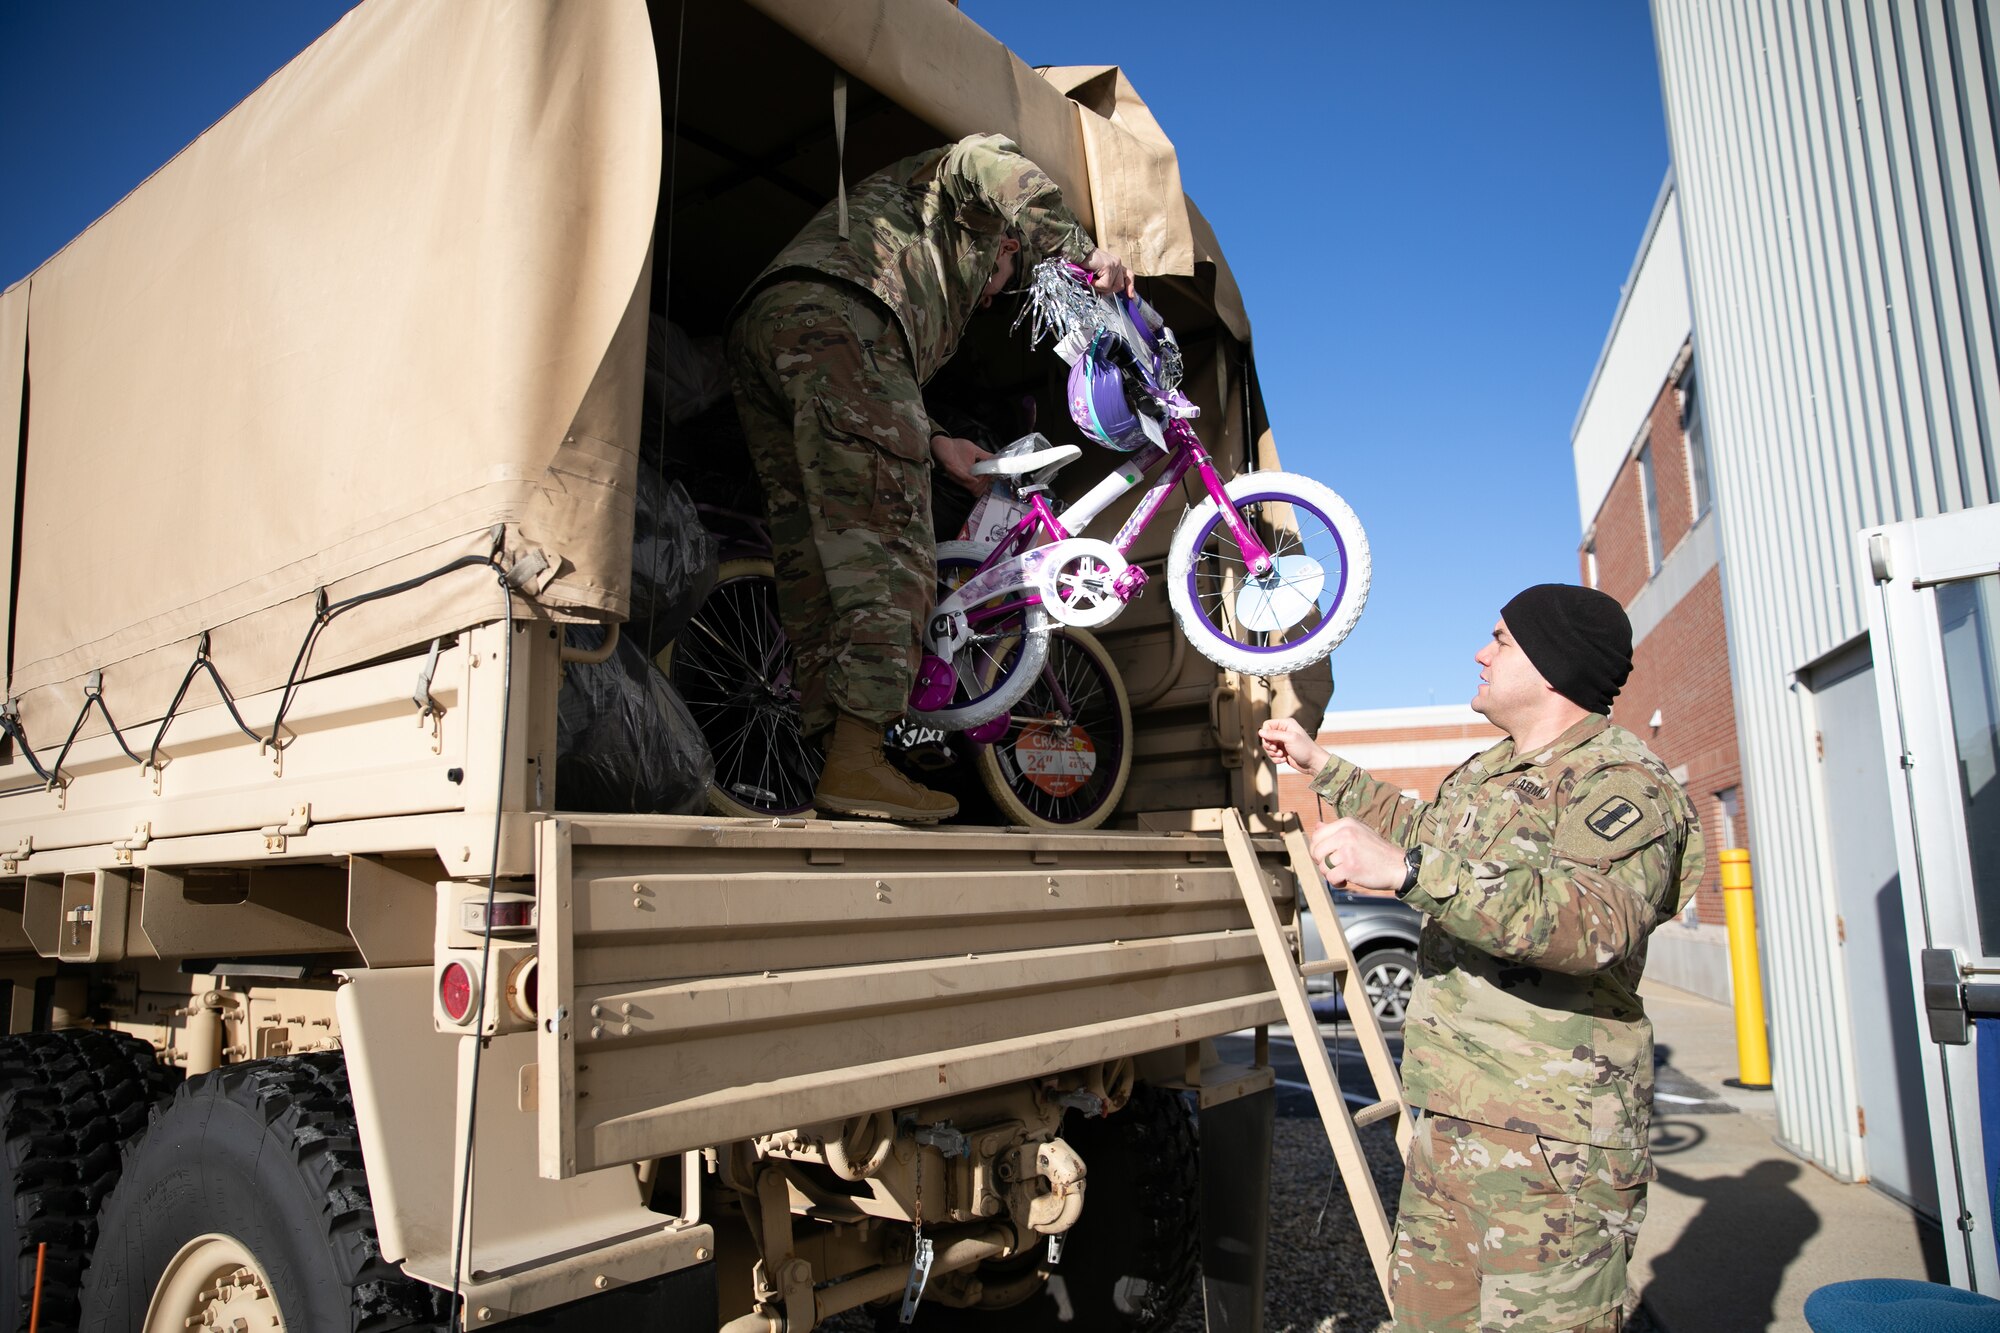 1st Lt. Chris Lind with the 197th Field Artillery Brigade (rear detachment) and 1st Sgt. Paul Emond, senior enlisted advisor of NHNG's 744th Forward Support Company, 3rd Battalion, 197th Field Artillery Regiment, load donated bikes into a light medium tactical vehicle for Operation Santa Claus in Concord on Dec. 13, 2022.